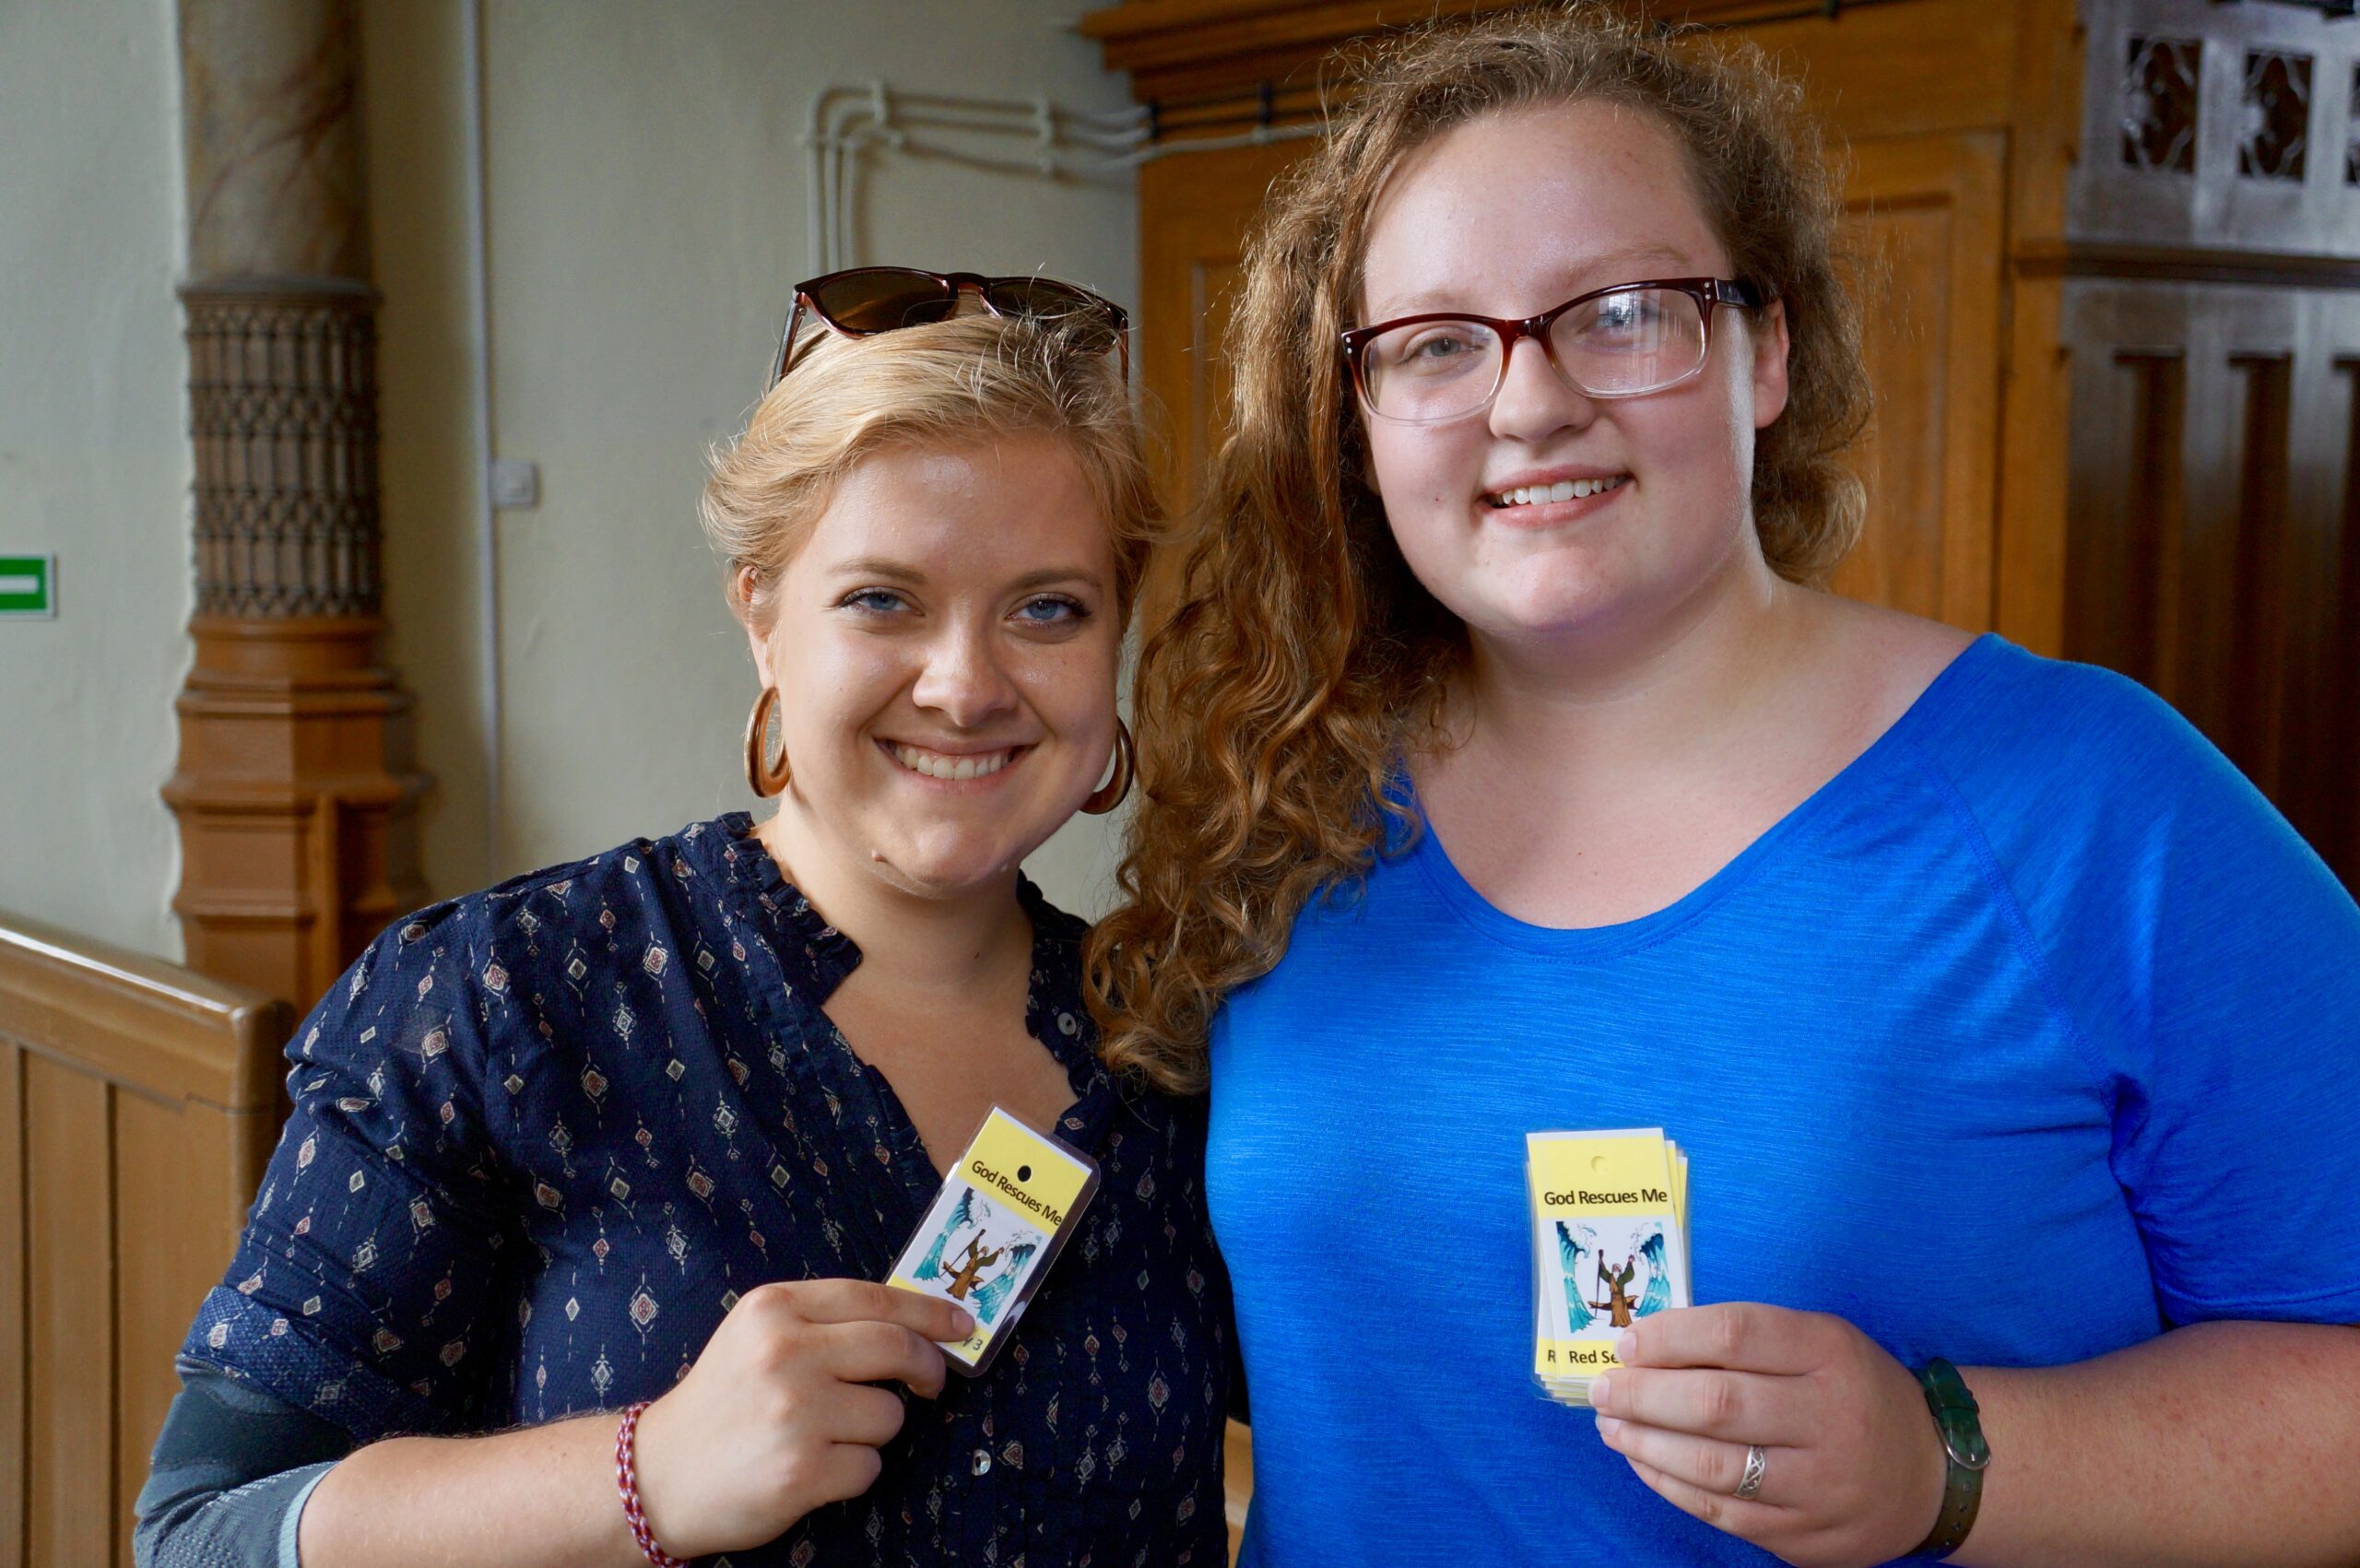 Photo: GEO Missionary Sarah Harms and a teen from Immanuel Lutheran Church in Broken Arrow, OK, hold up the “take home” cards for the day of “God Rescues Me” at an Engligh Bible Camp in Poland. LCMS/Benjamin Helge Used with permission.